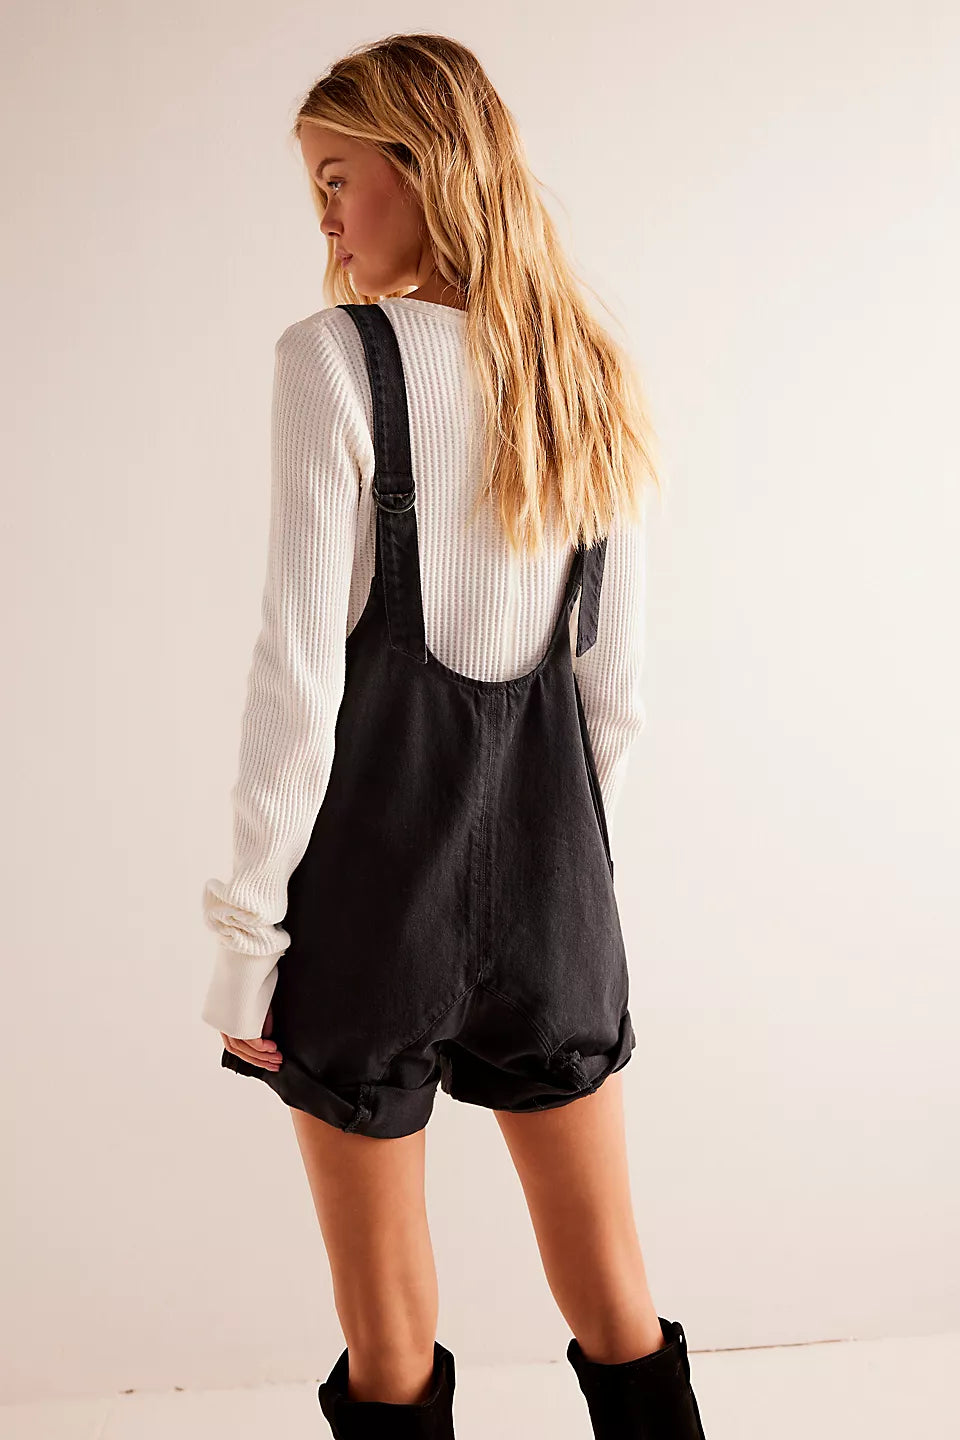 FREE PEOPLE-"HIGH ROLLER" SHORTALL